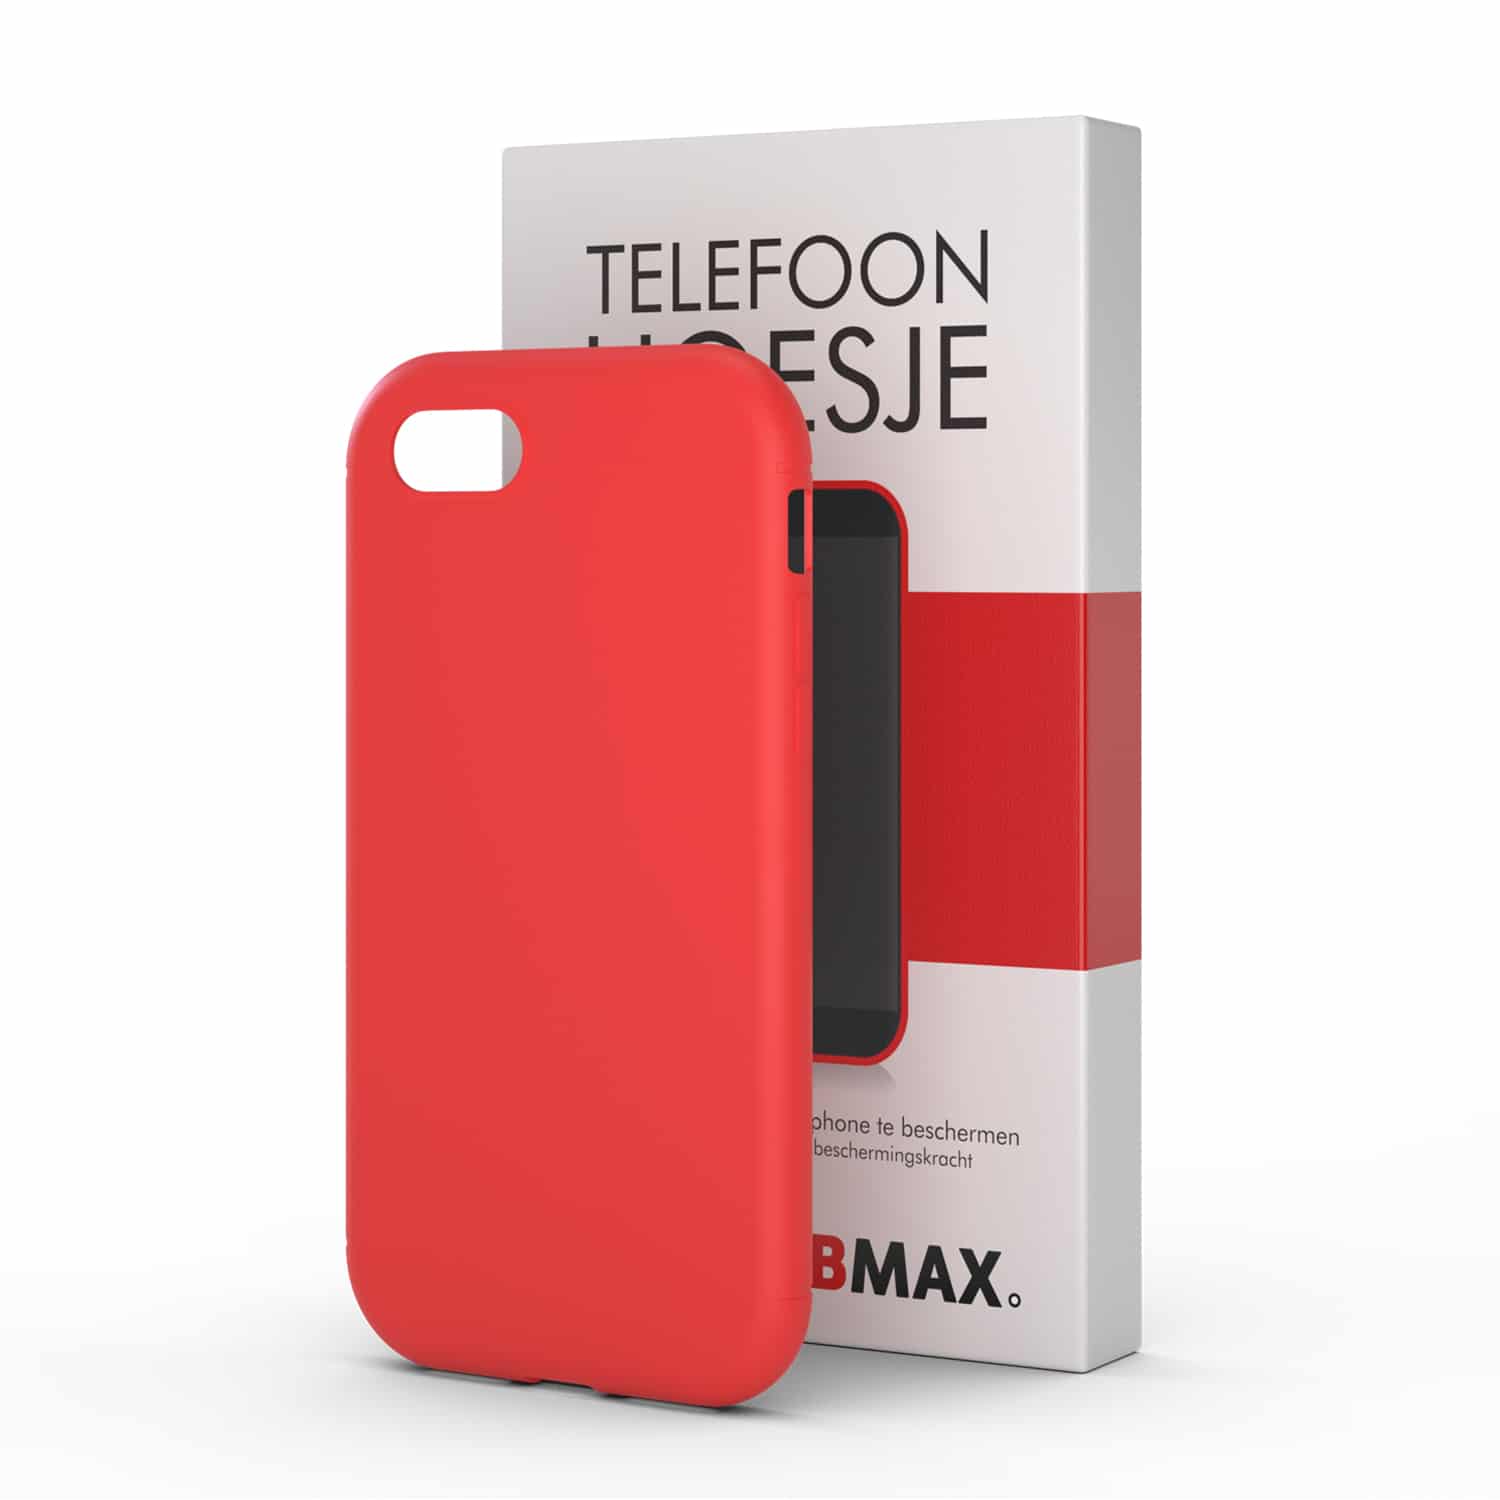 iPhone 7/8 rood Essential hoesje